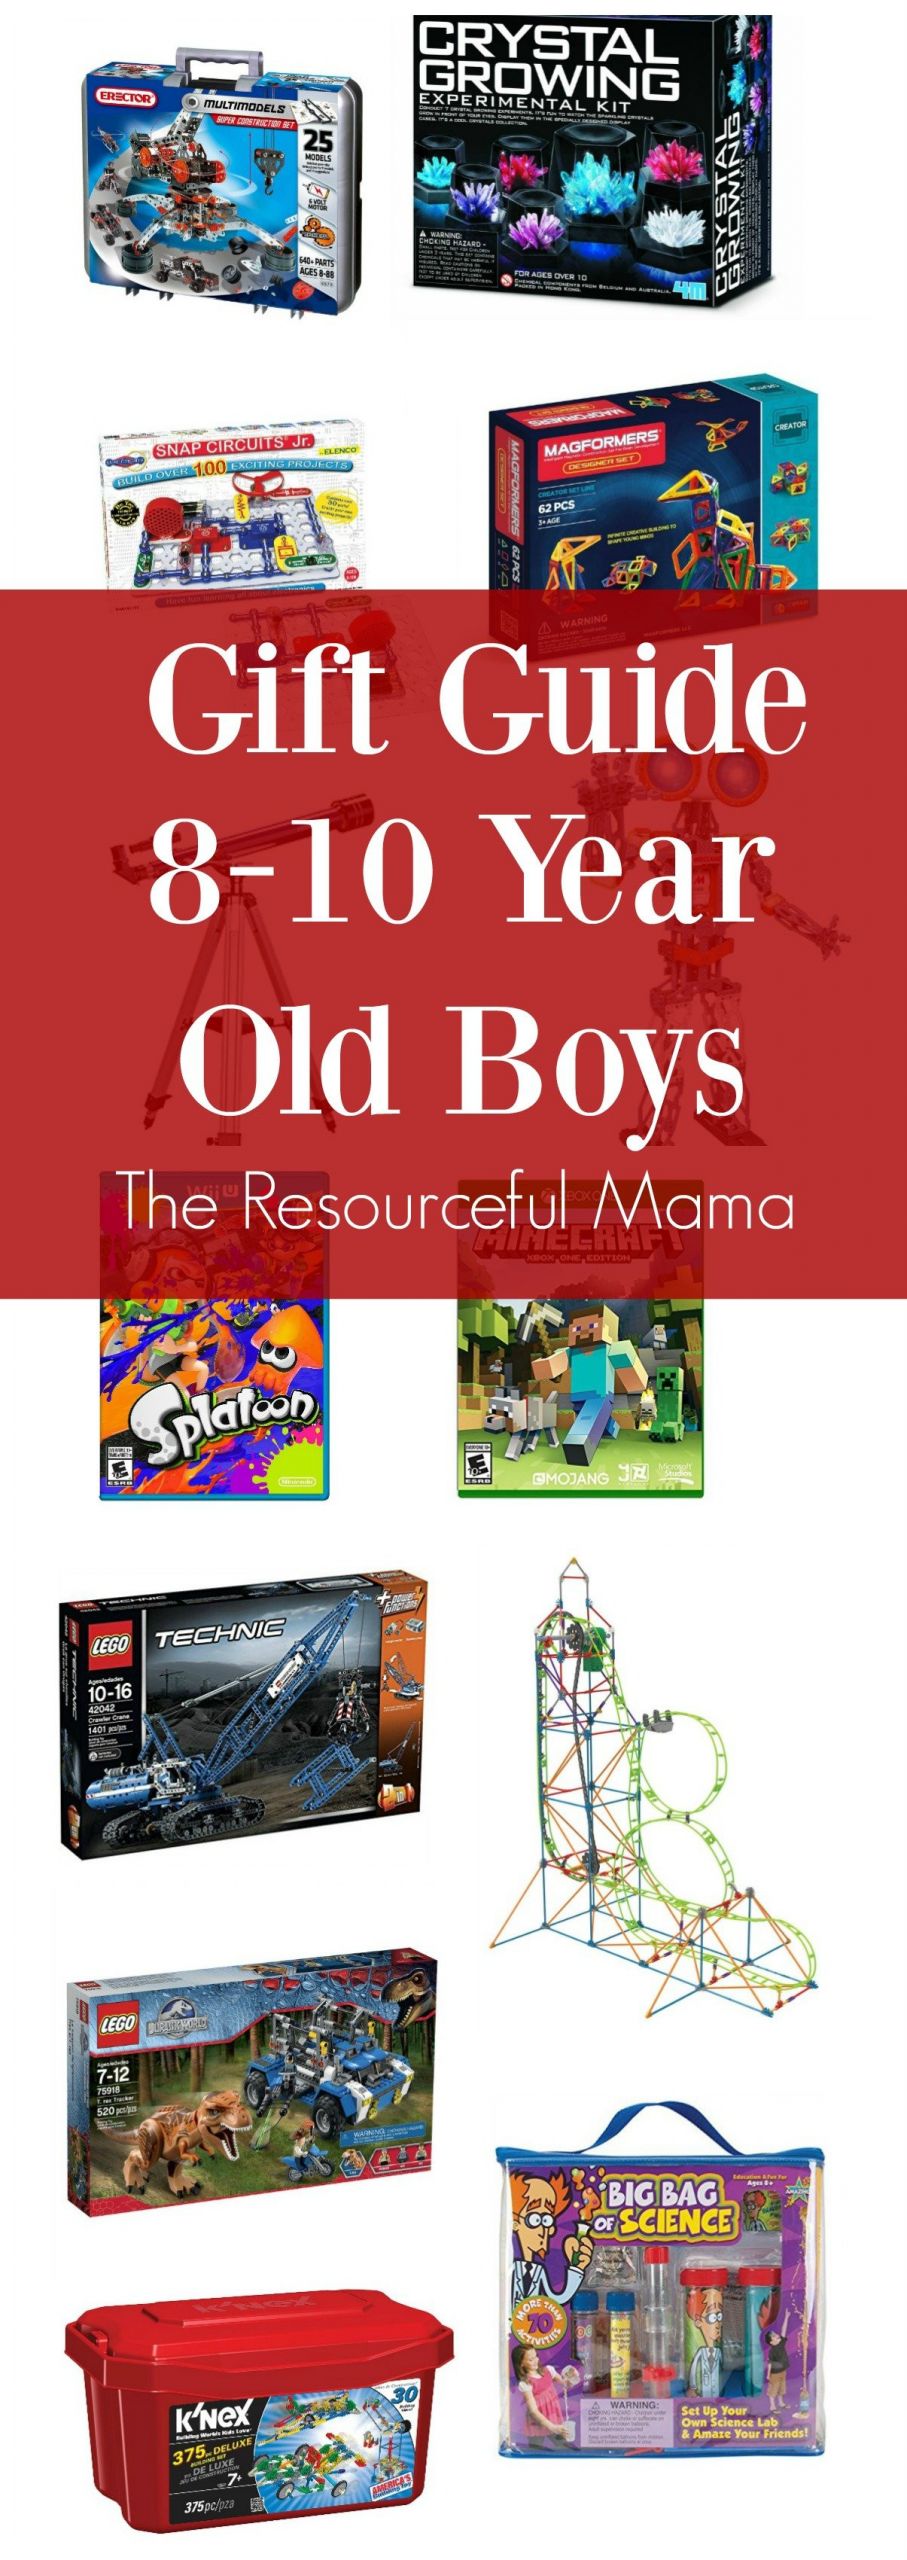 Gift Ideas For 10 Year Old Boys
 Gift Ideas 8 10 Year Old Boys